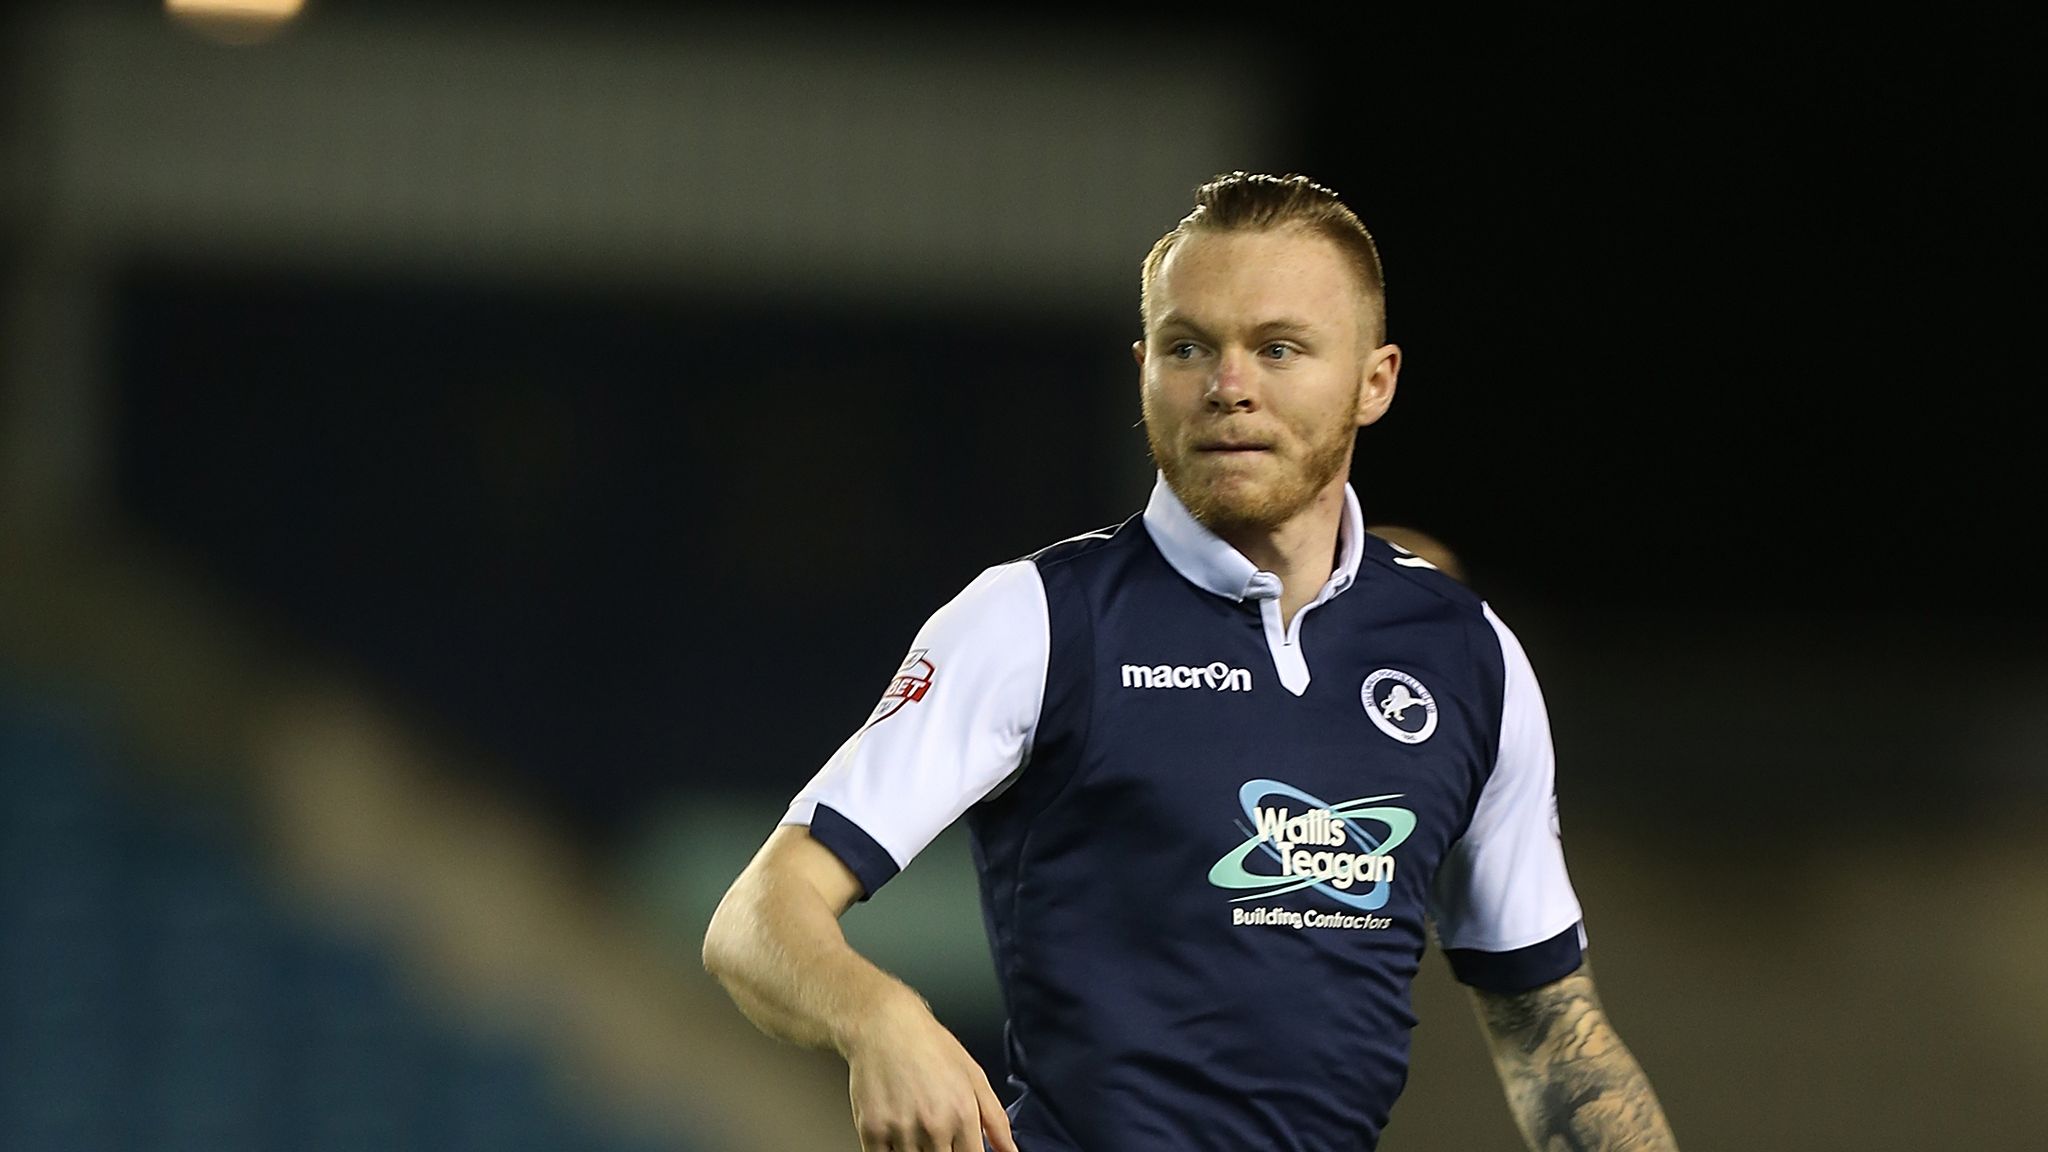 Another promising Millwall young player sent out on loan